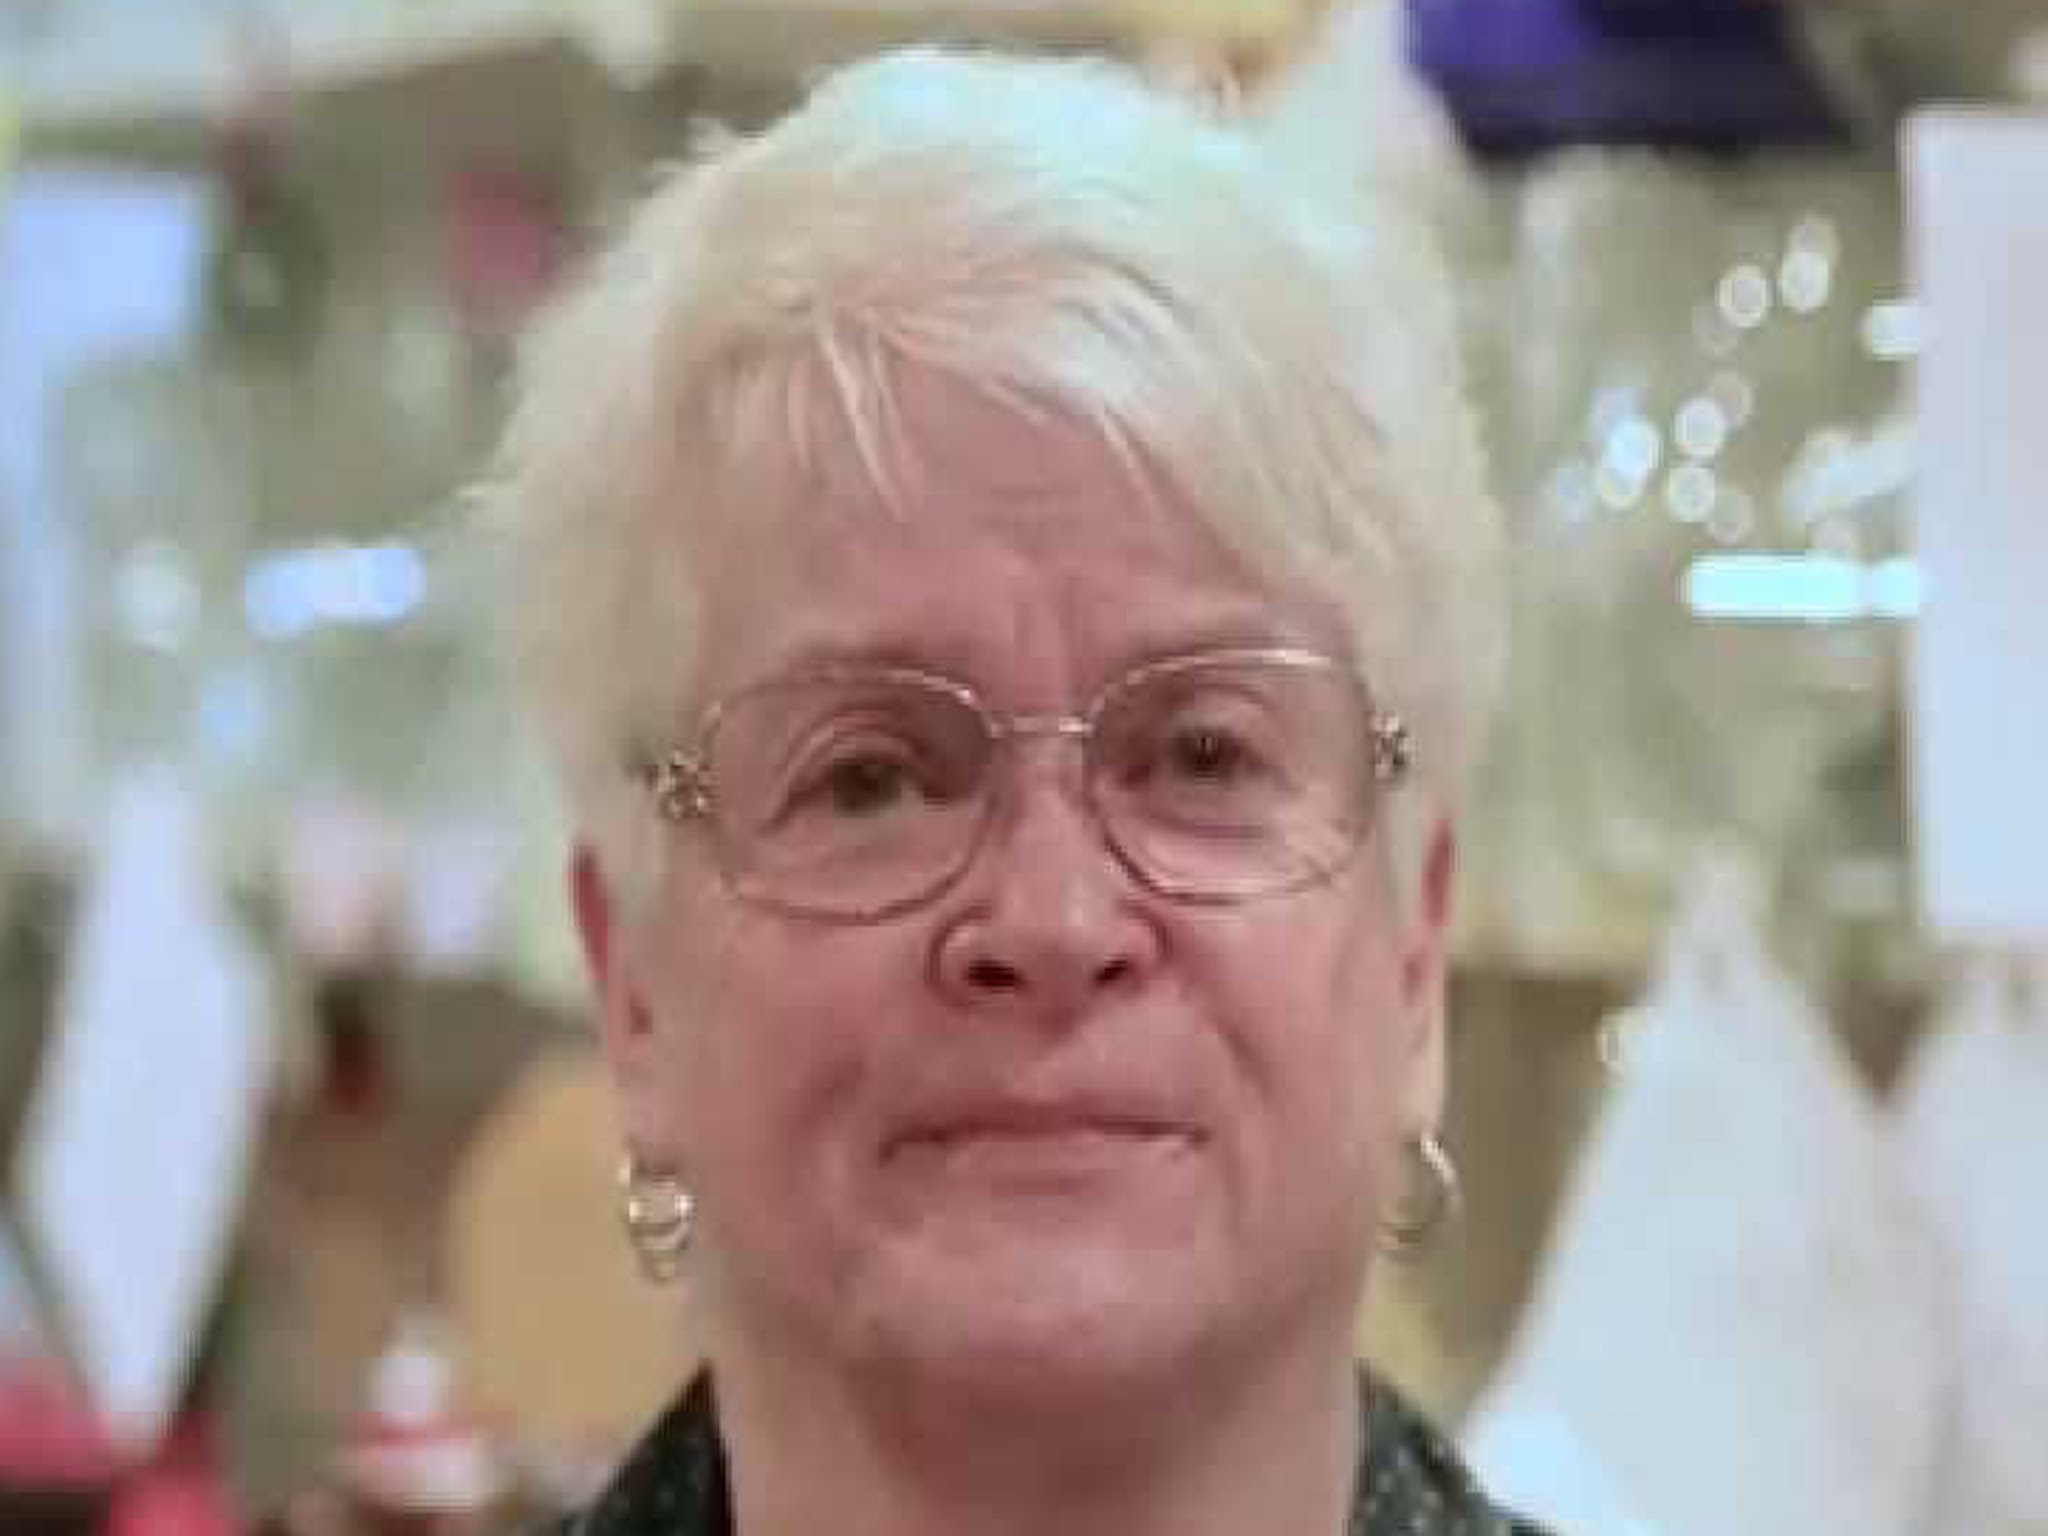 Barronelle Stutzman refused to provide flowers to a same-sex wedding